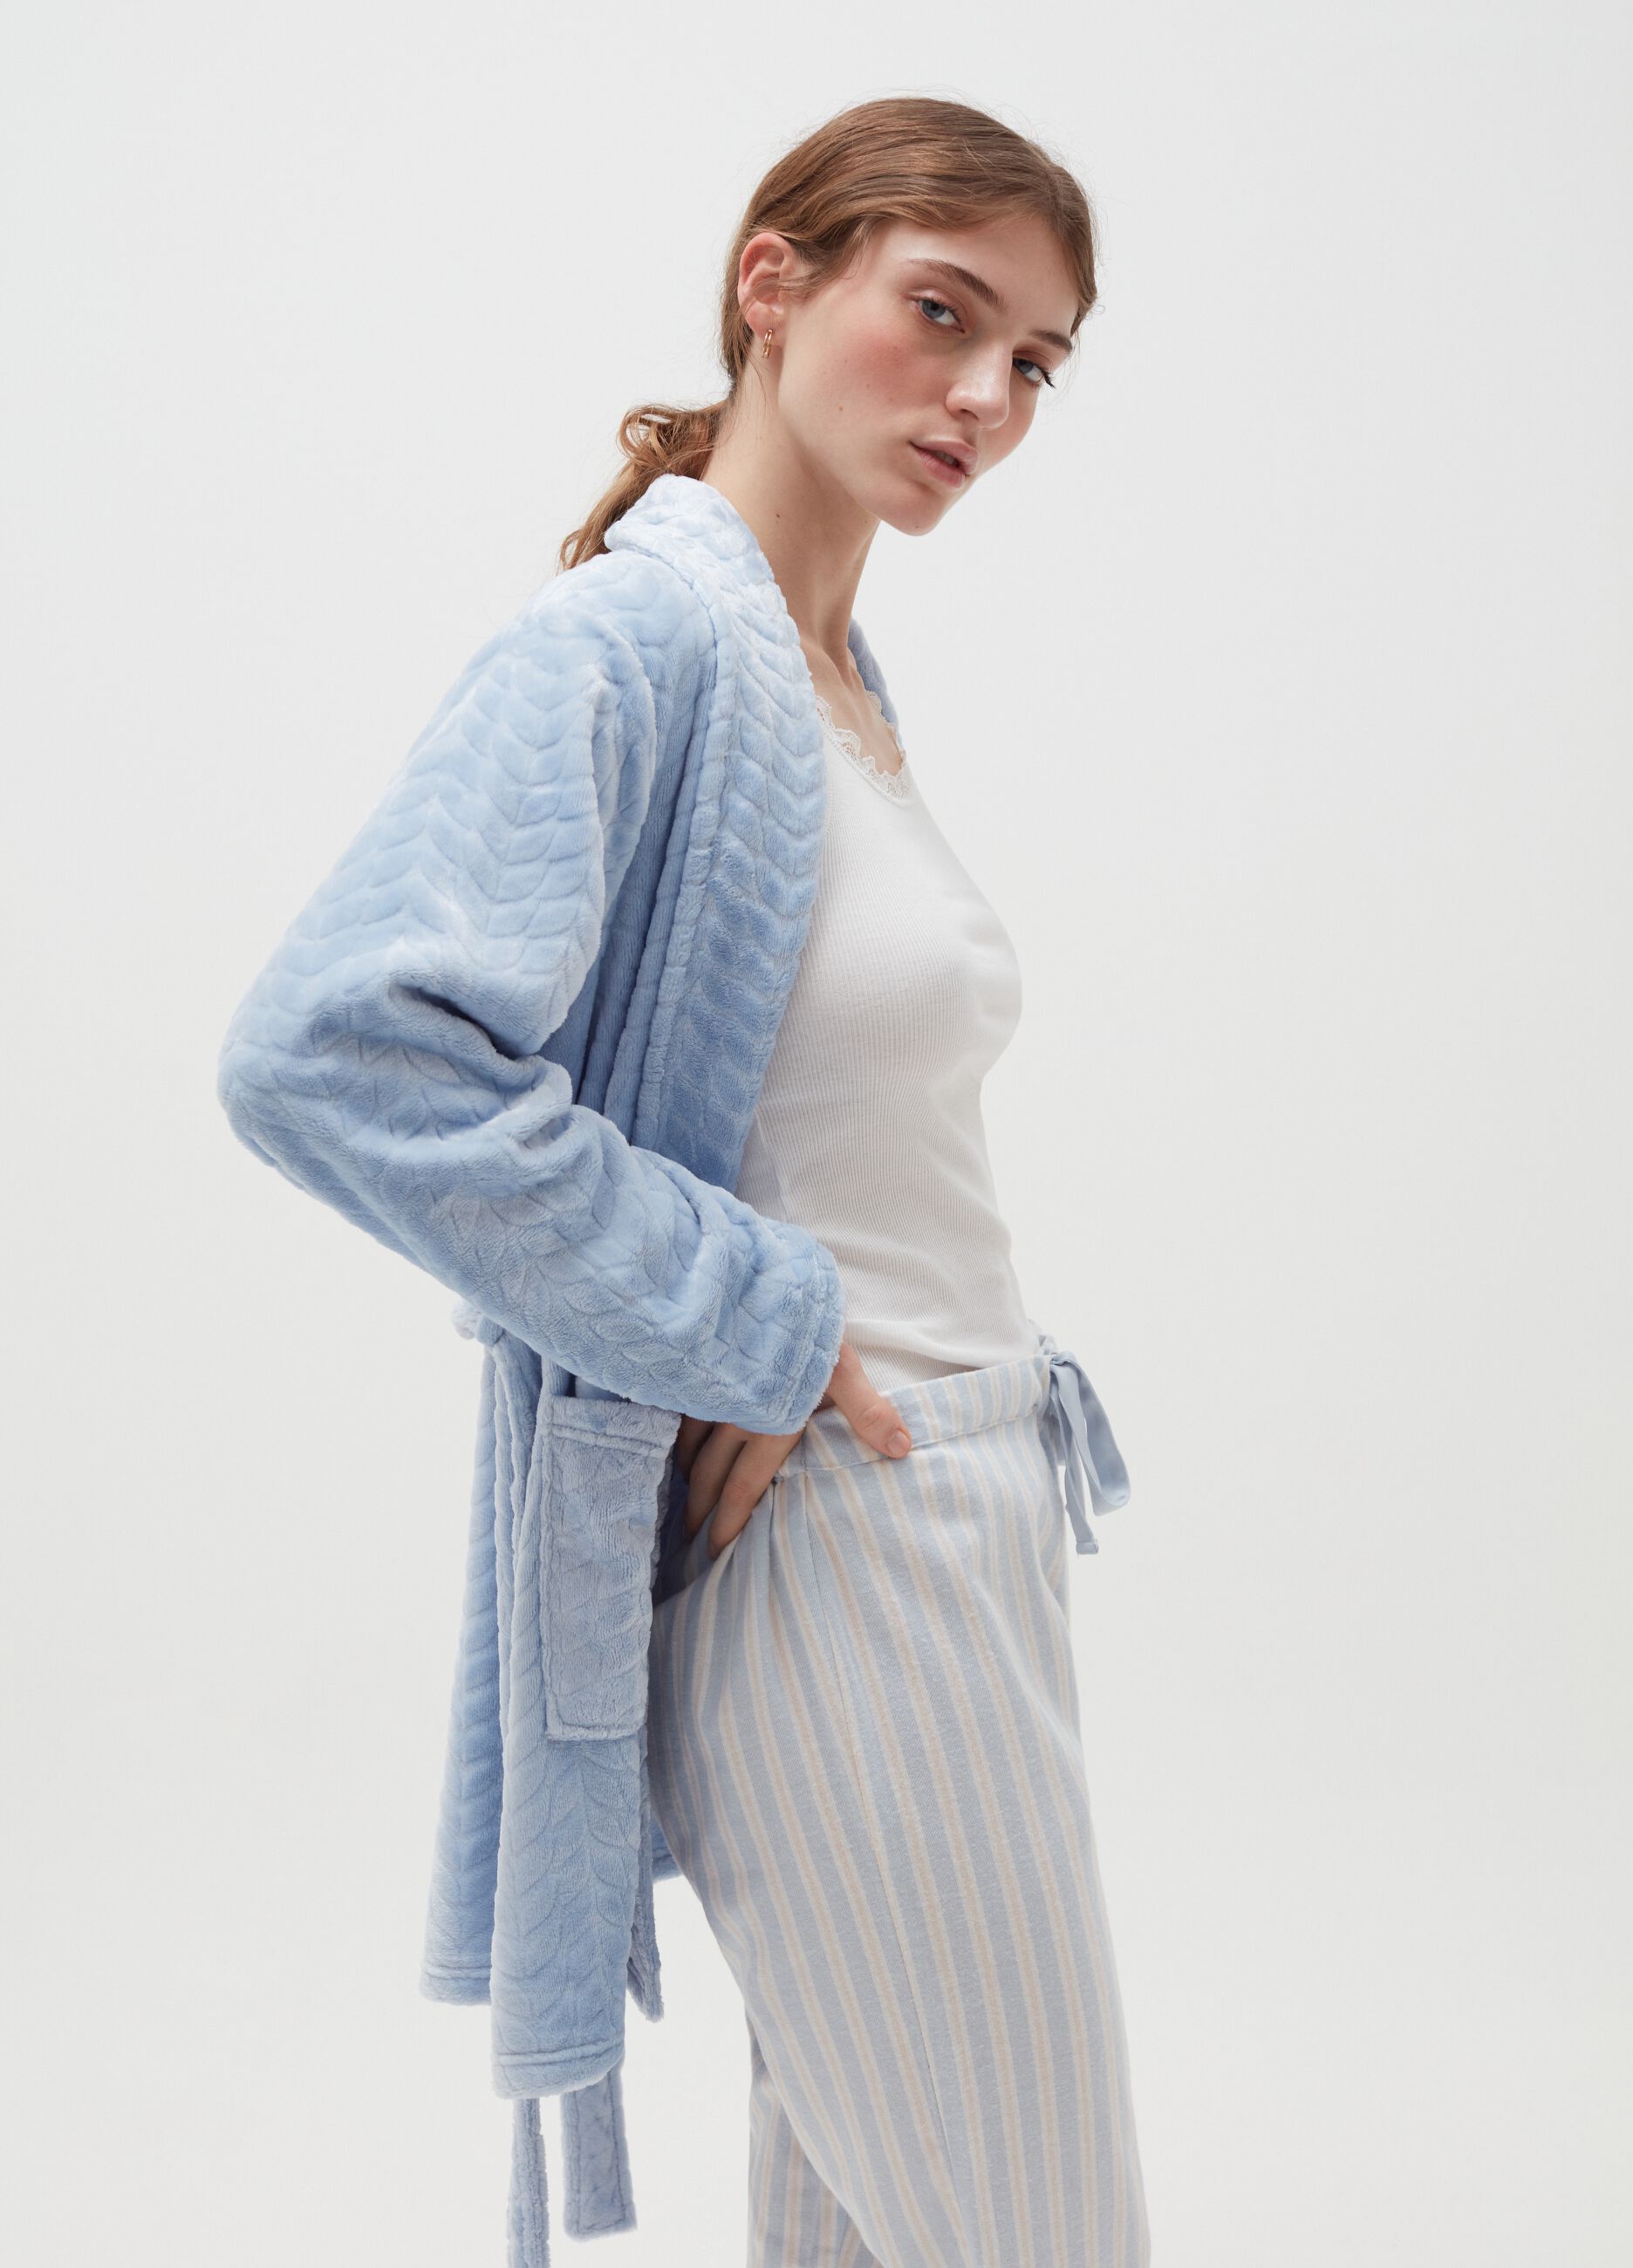 Chenille dressing gown with herringbone weave